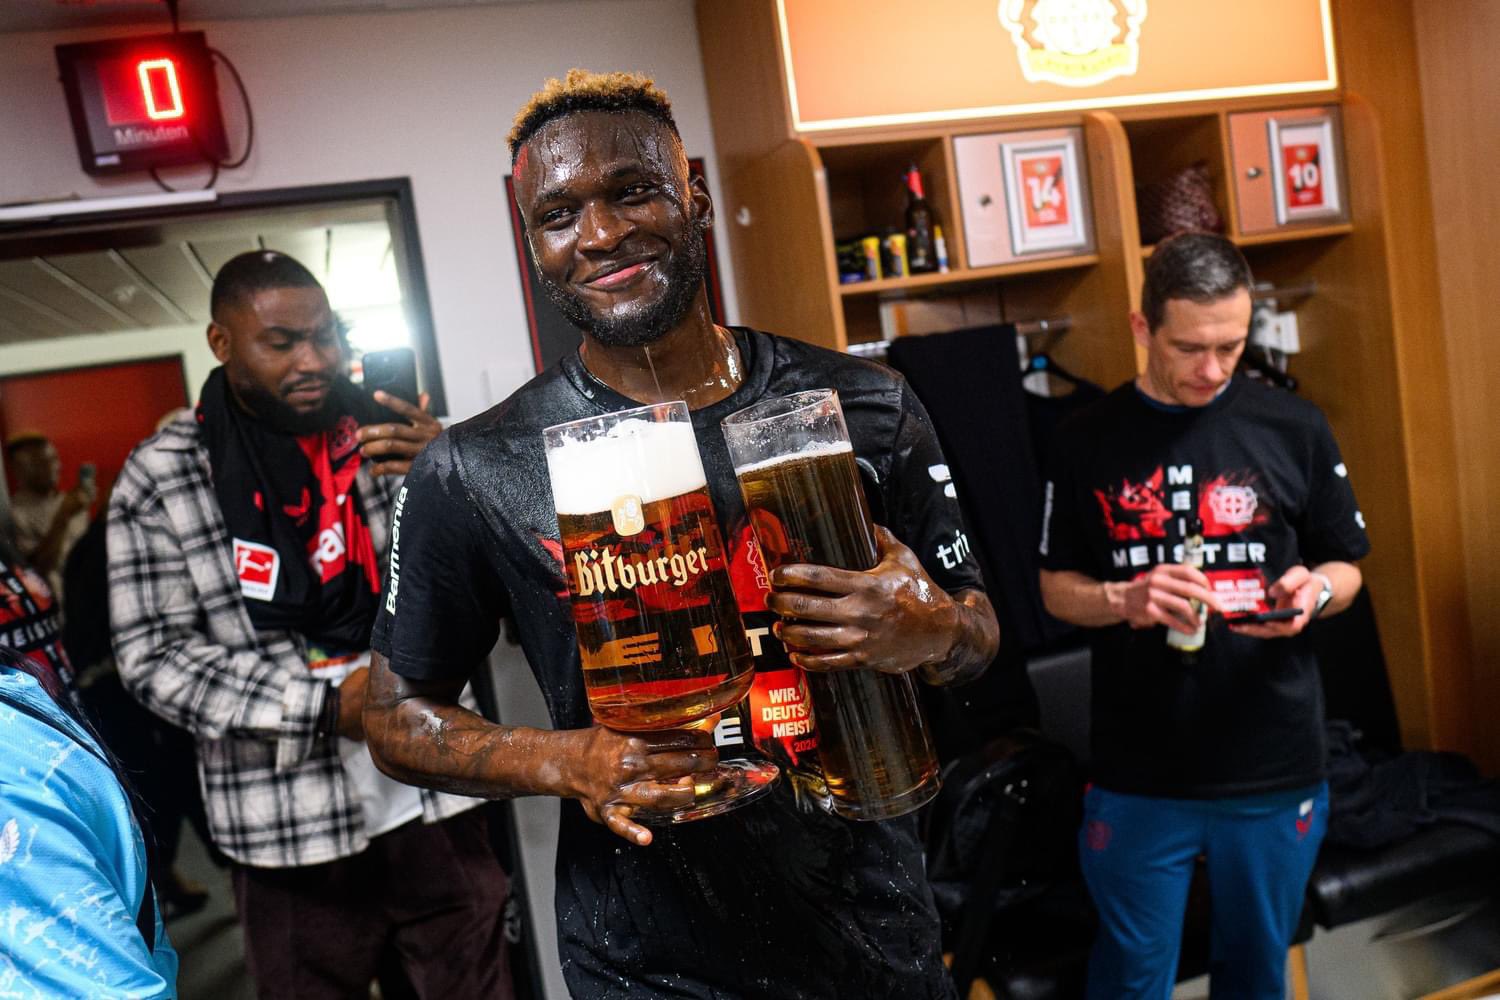 West Ham boss hopes Victor Boniface and Bayer Leverkusen drank too much beer